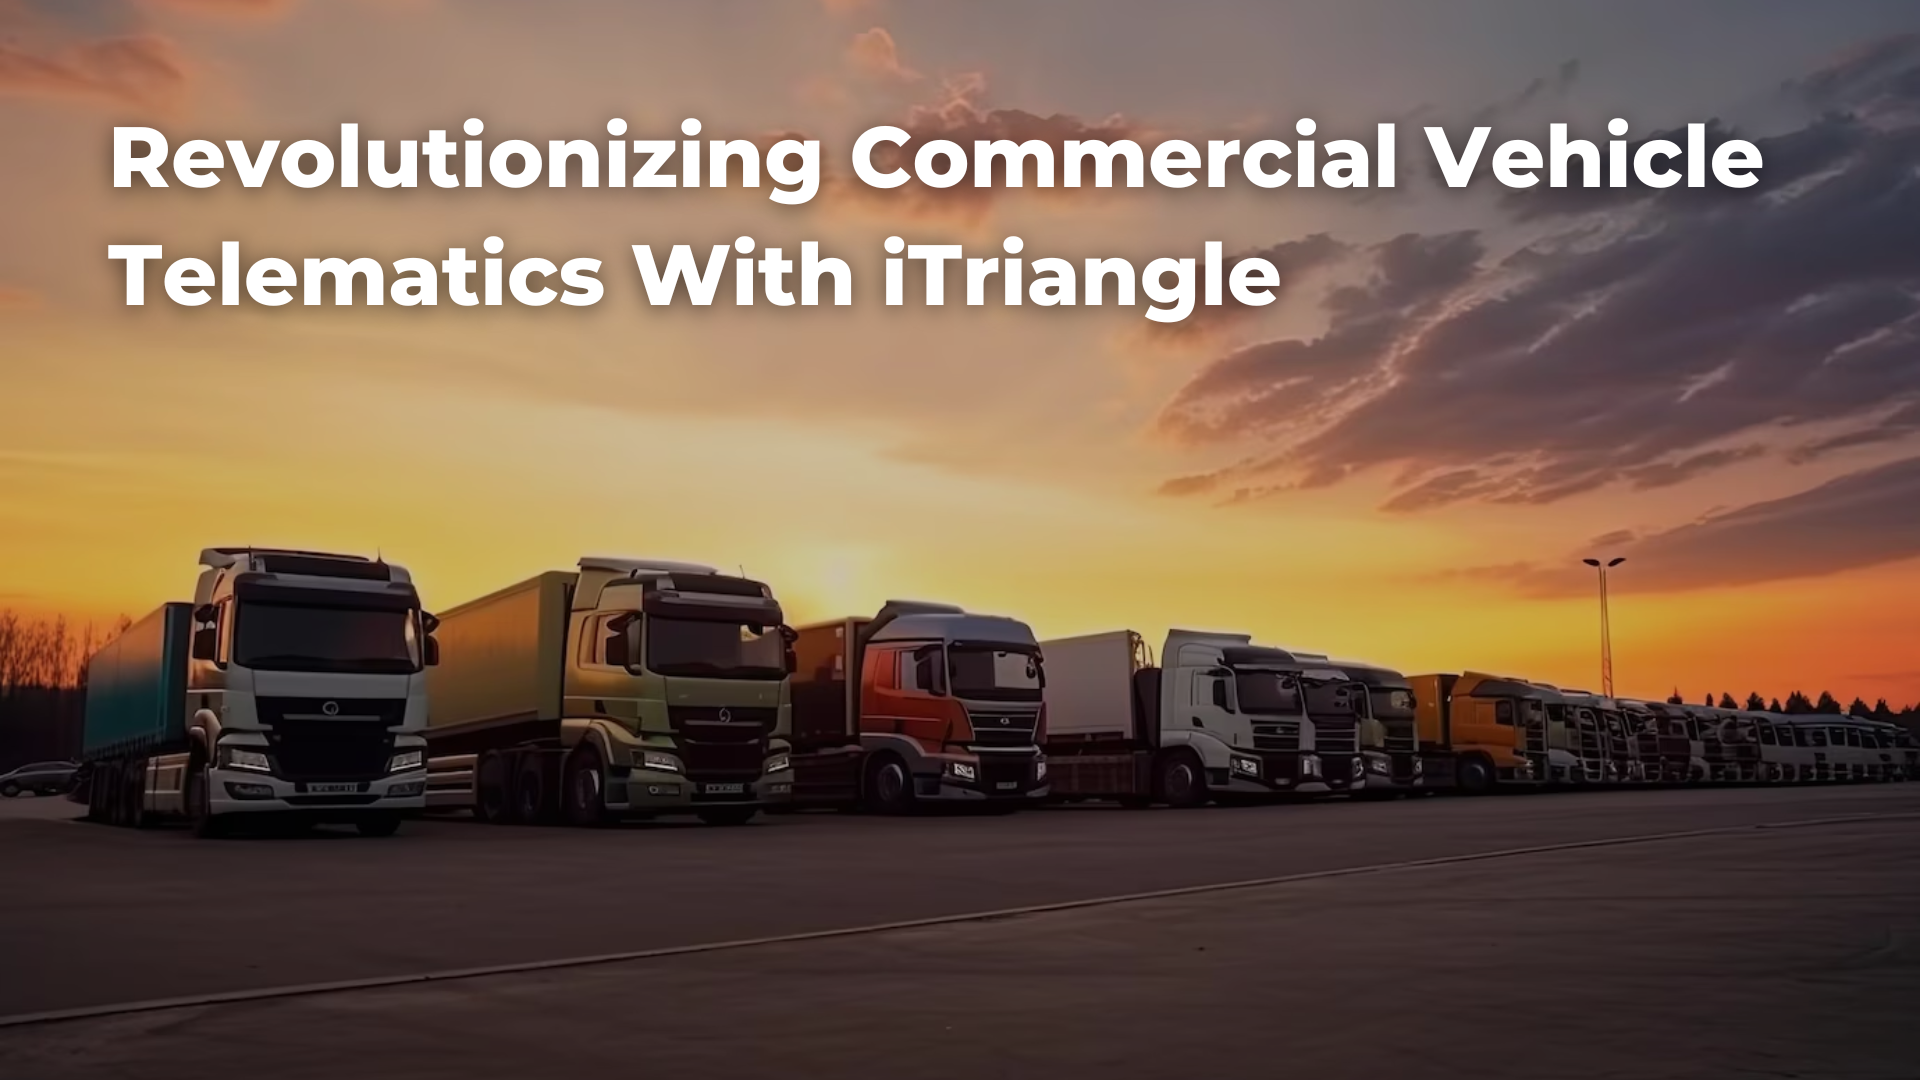 Revolutionizing Commercial Vehicle Telematics With iTriangle